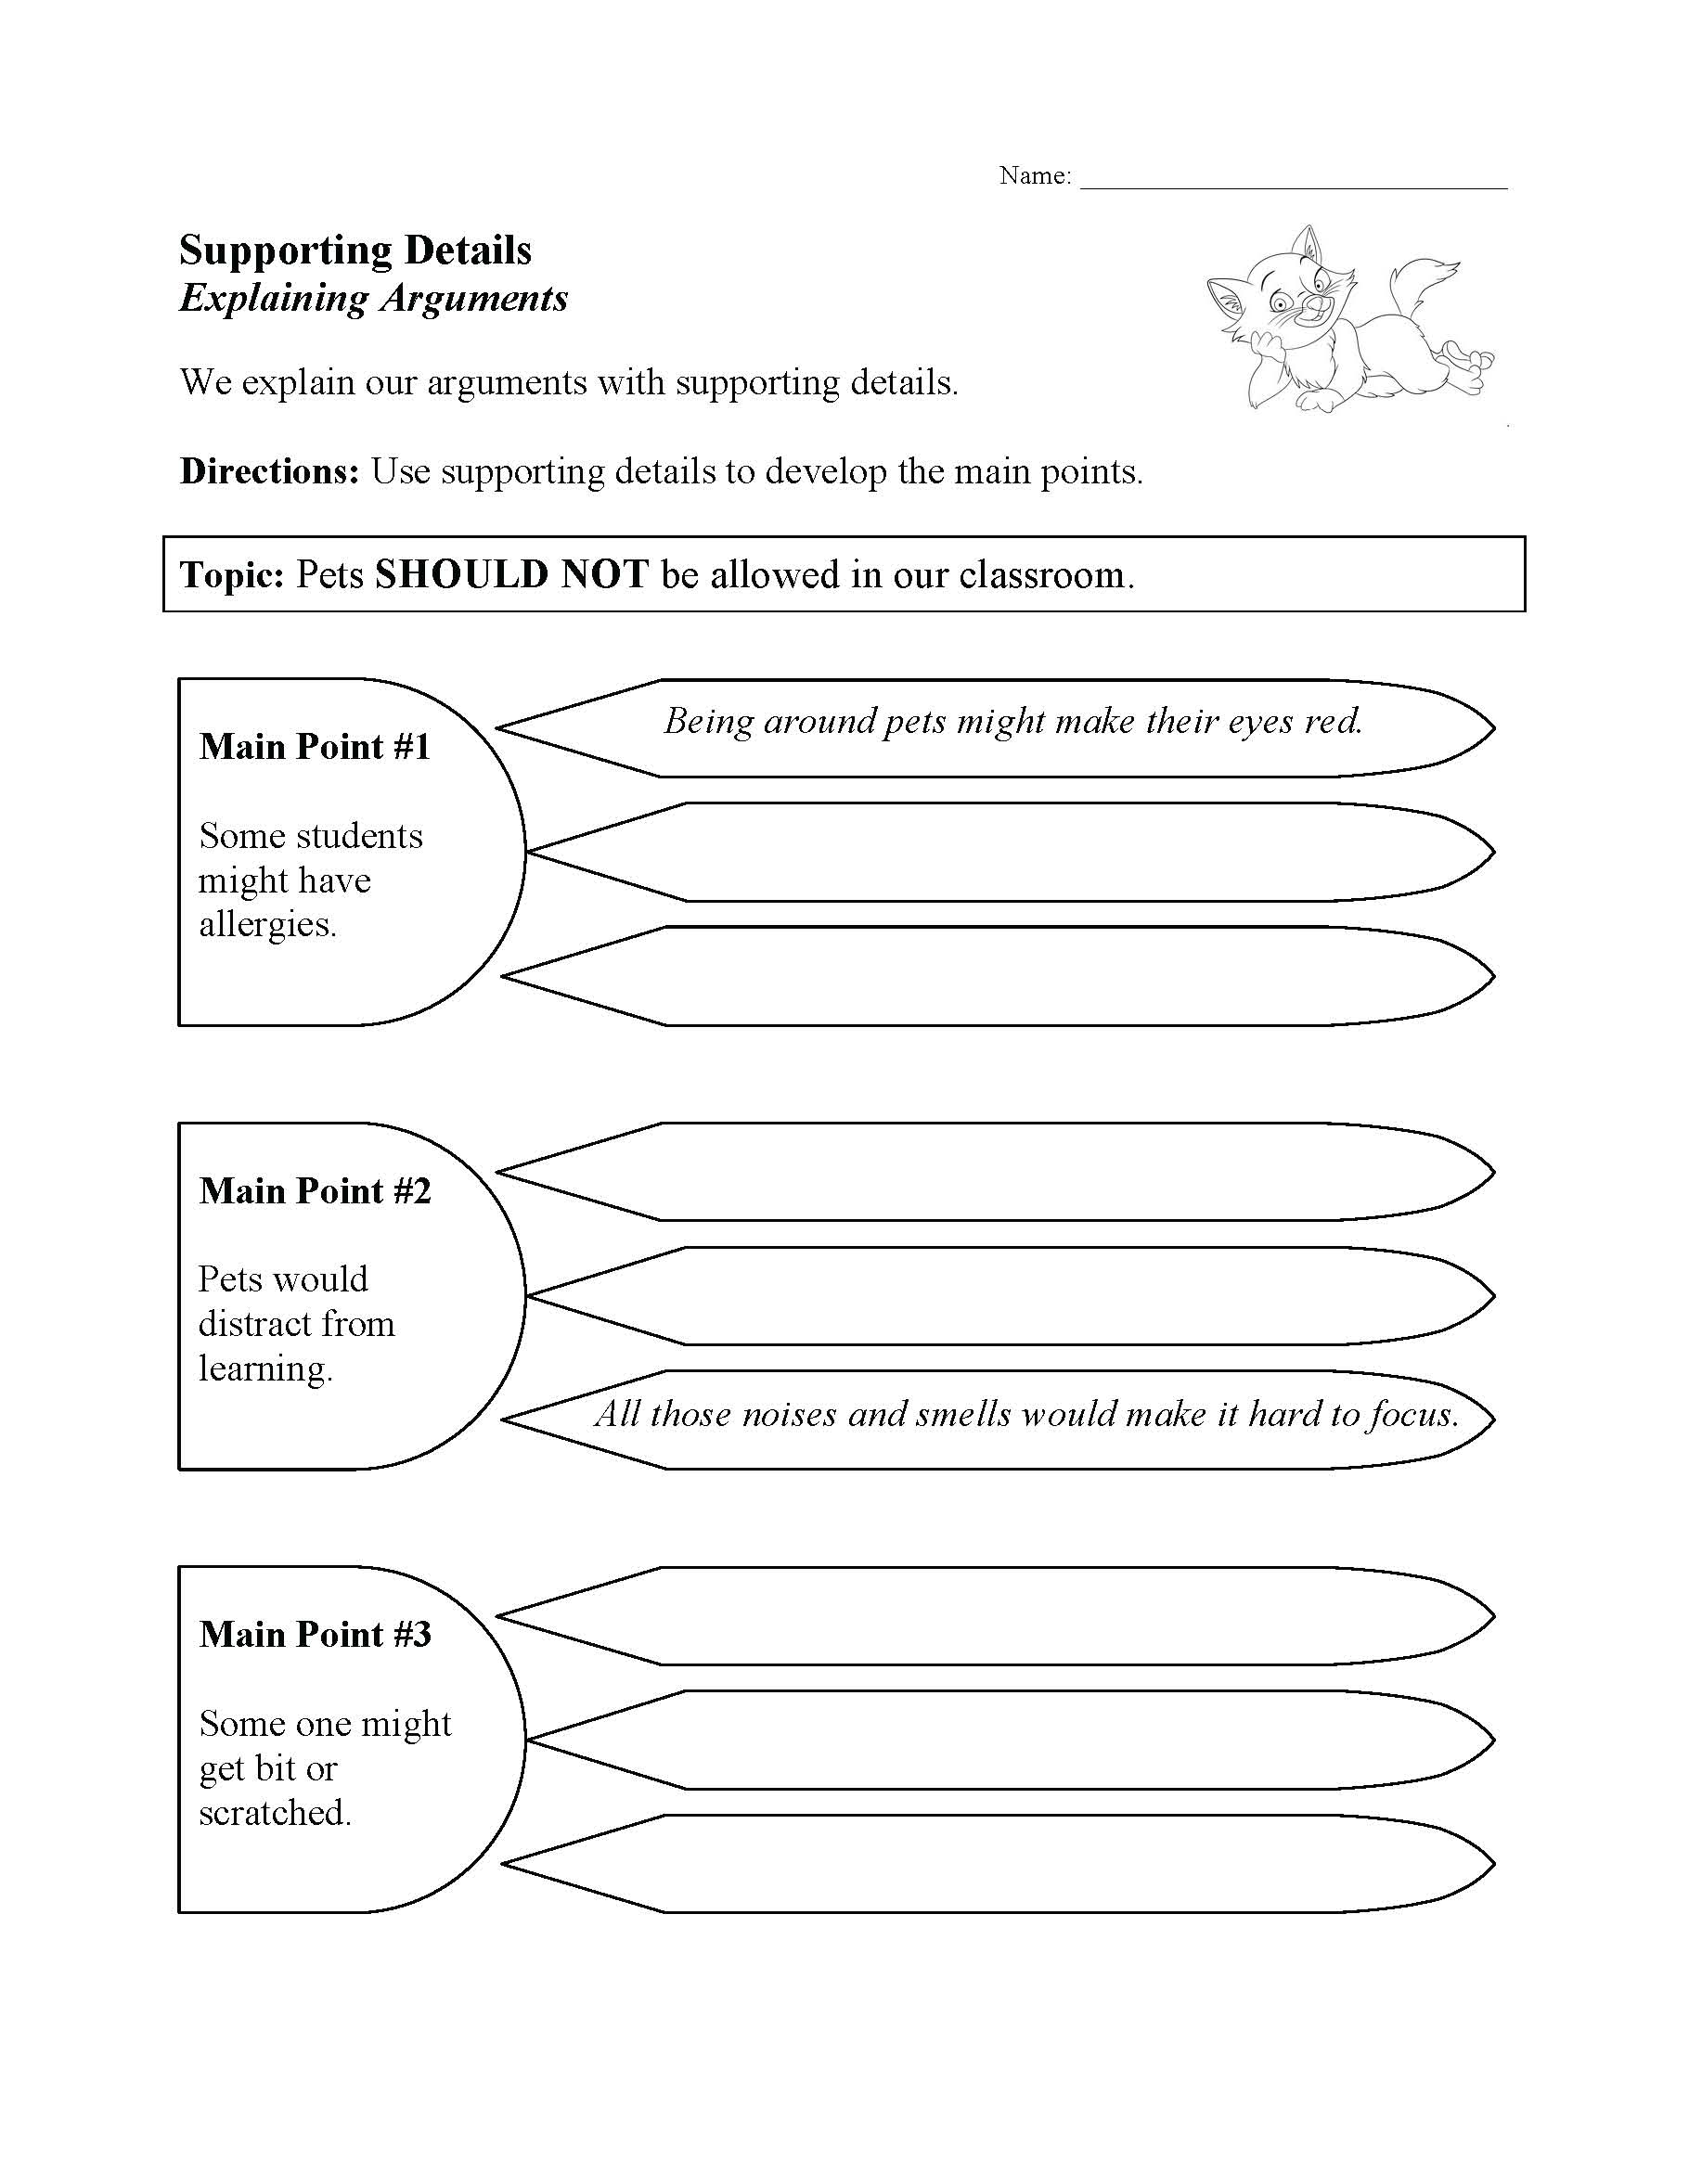 This is a preview image of our Supporting Details Worksheet. Click on it to enlarge this image and view the source file.